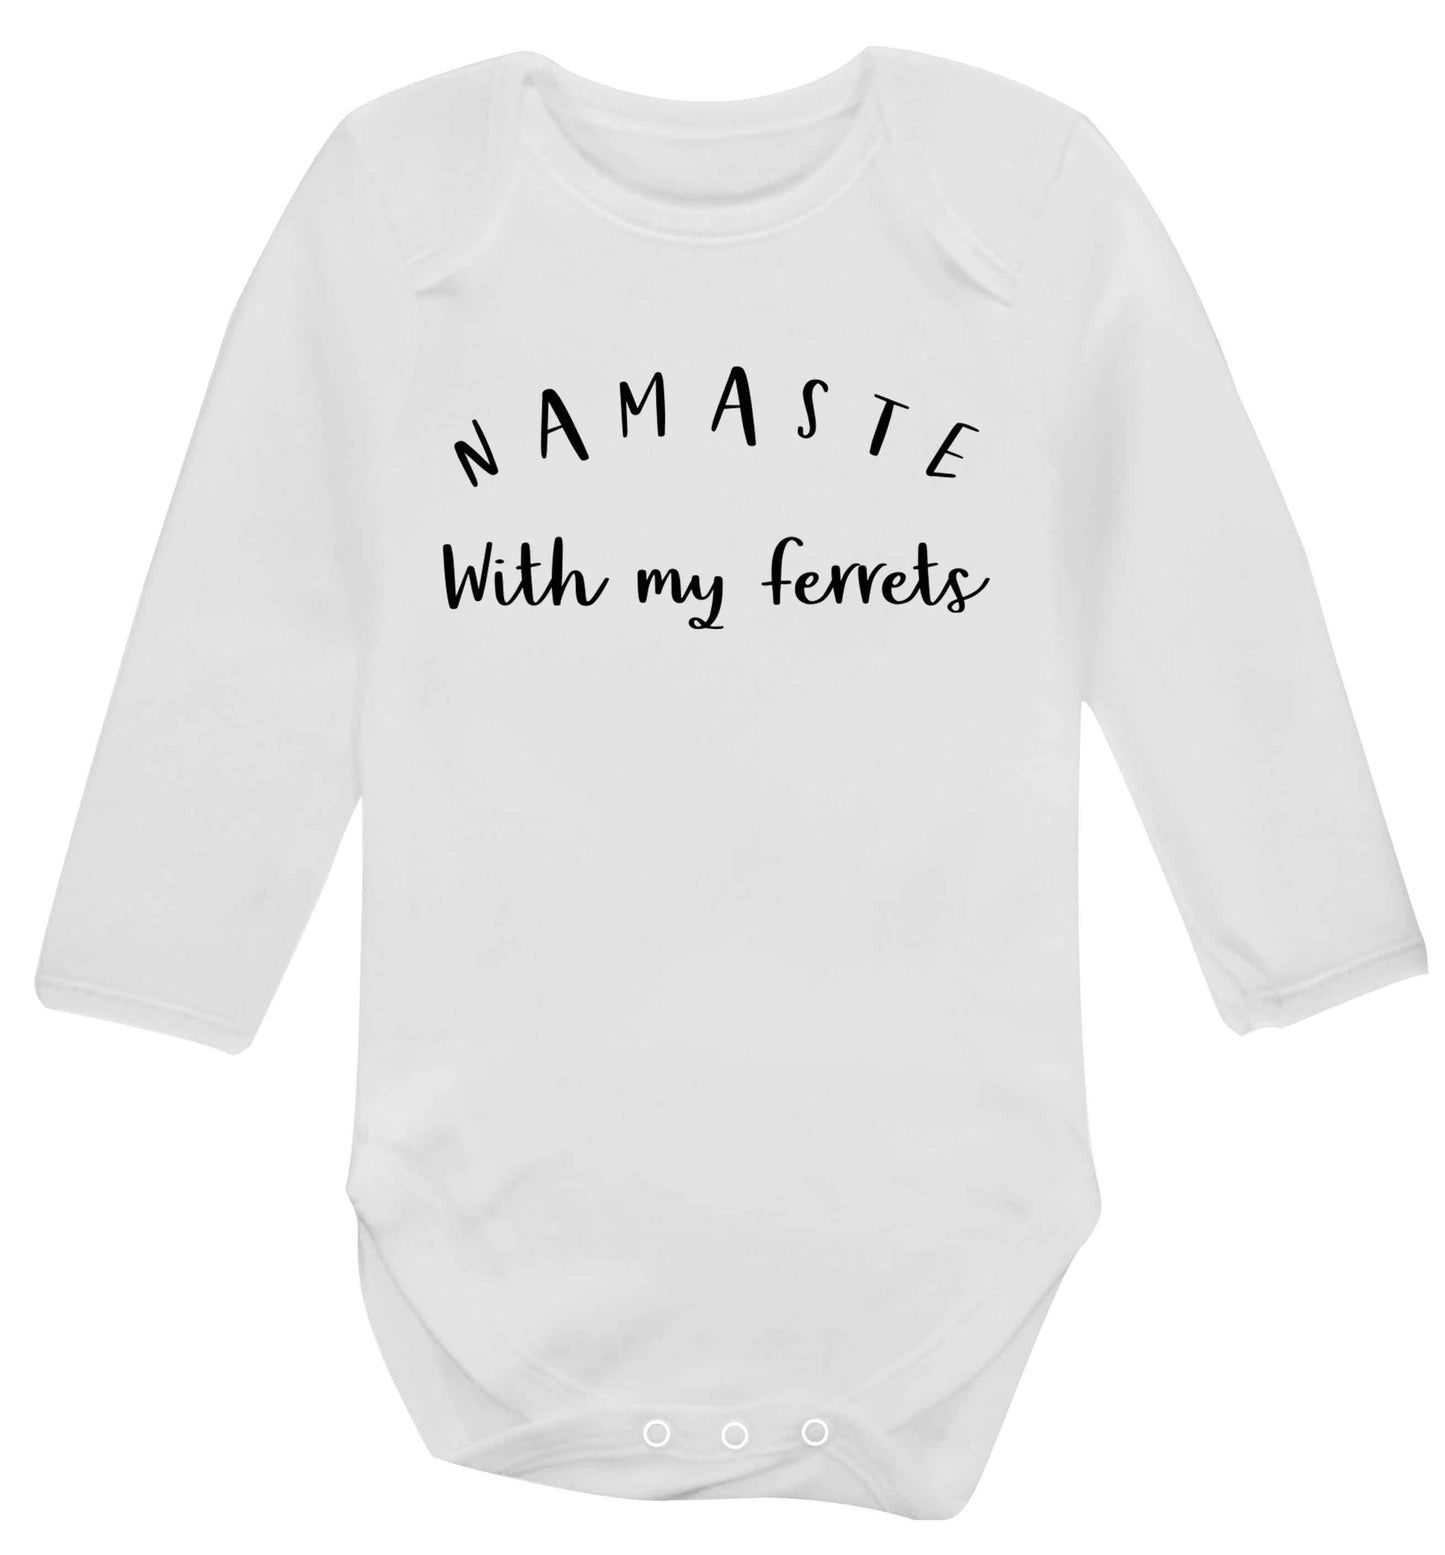 Namaste with my ferrets Baby Vest long sleeved white 6-12 months